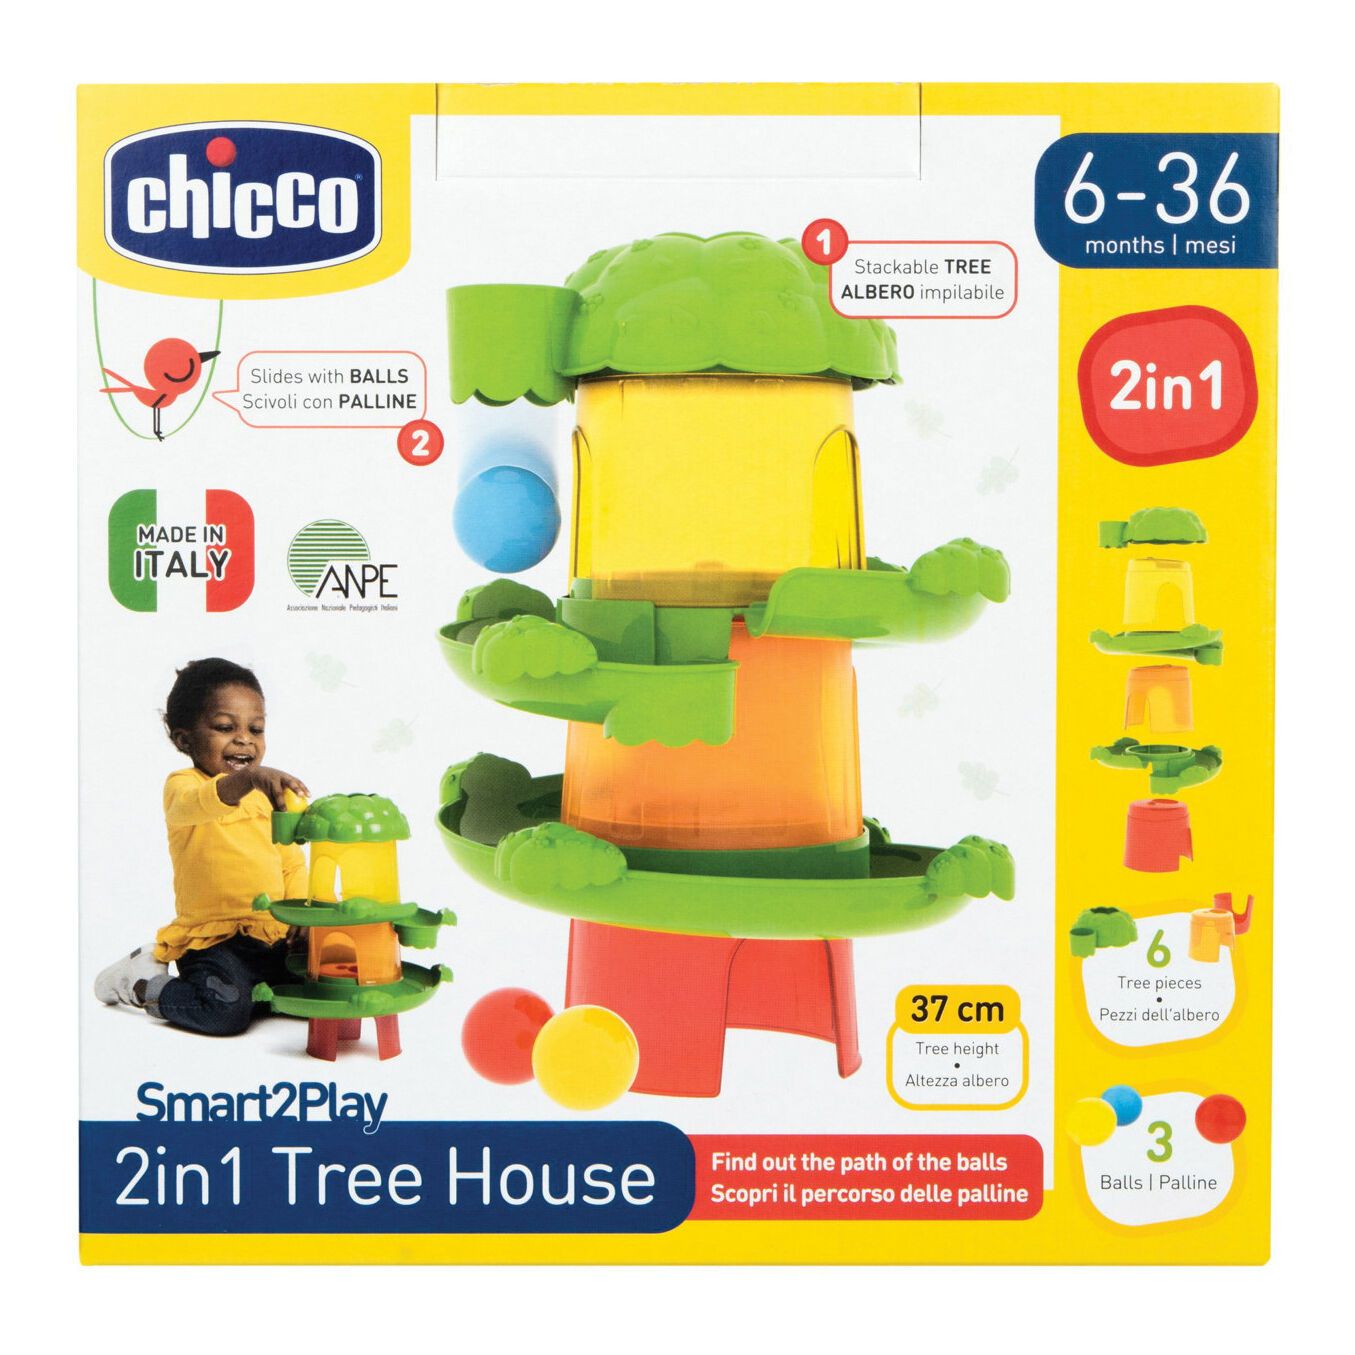 Chicco gioco 2 in 1 tree house